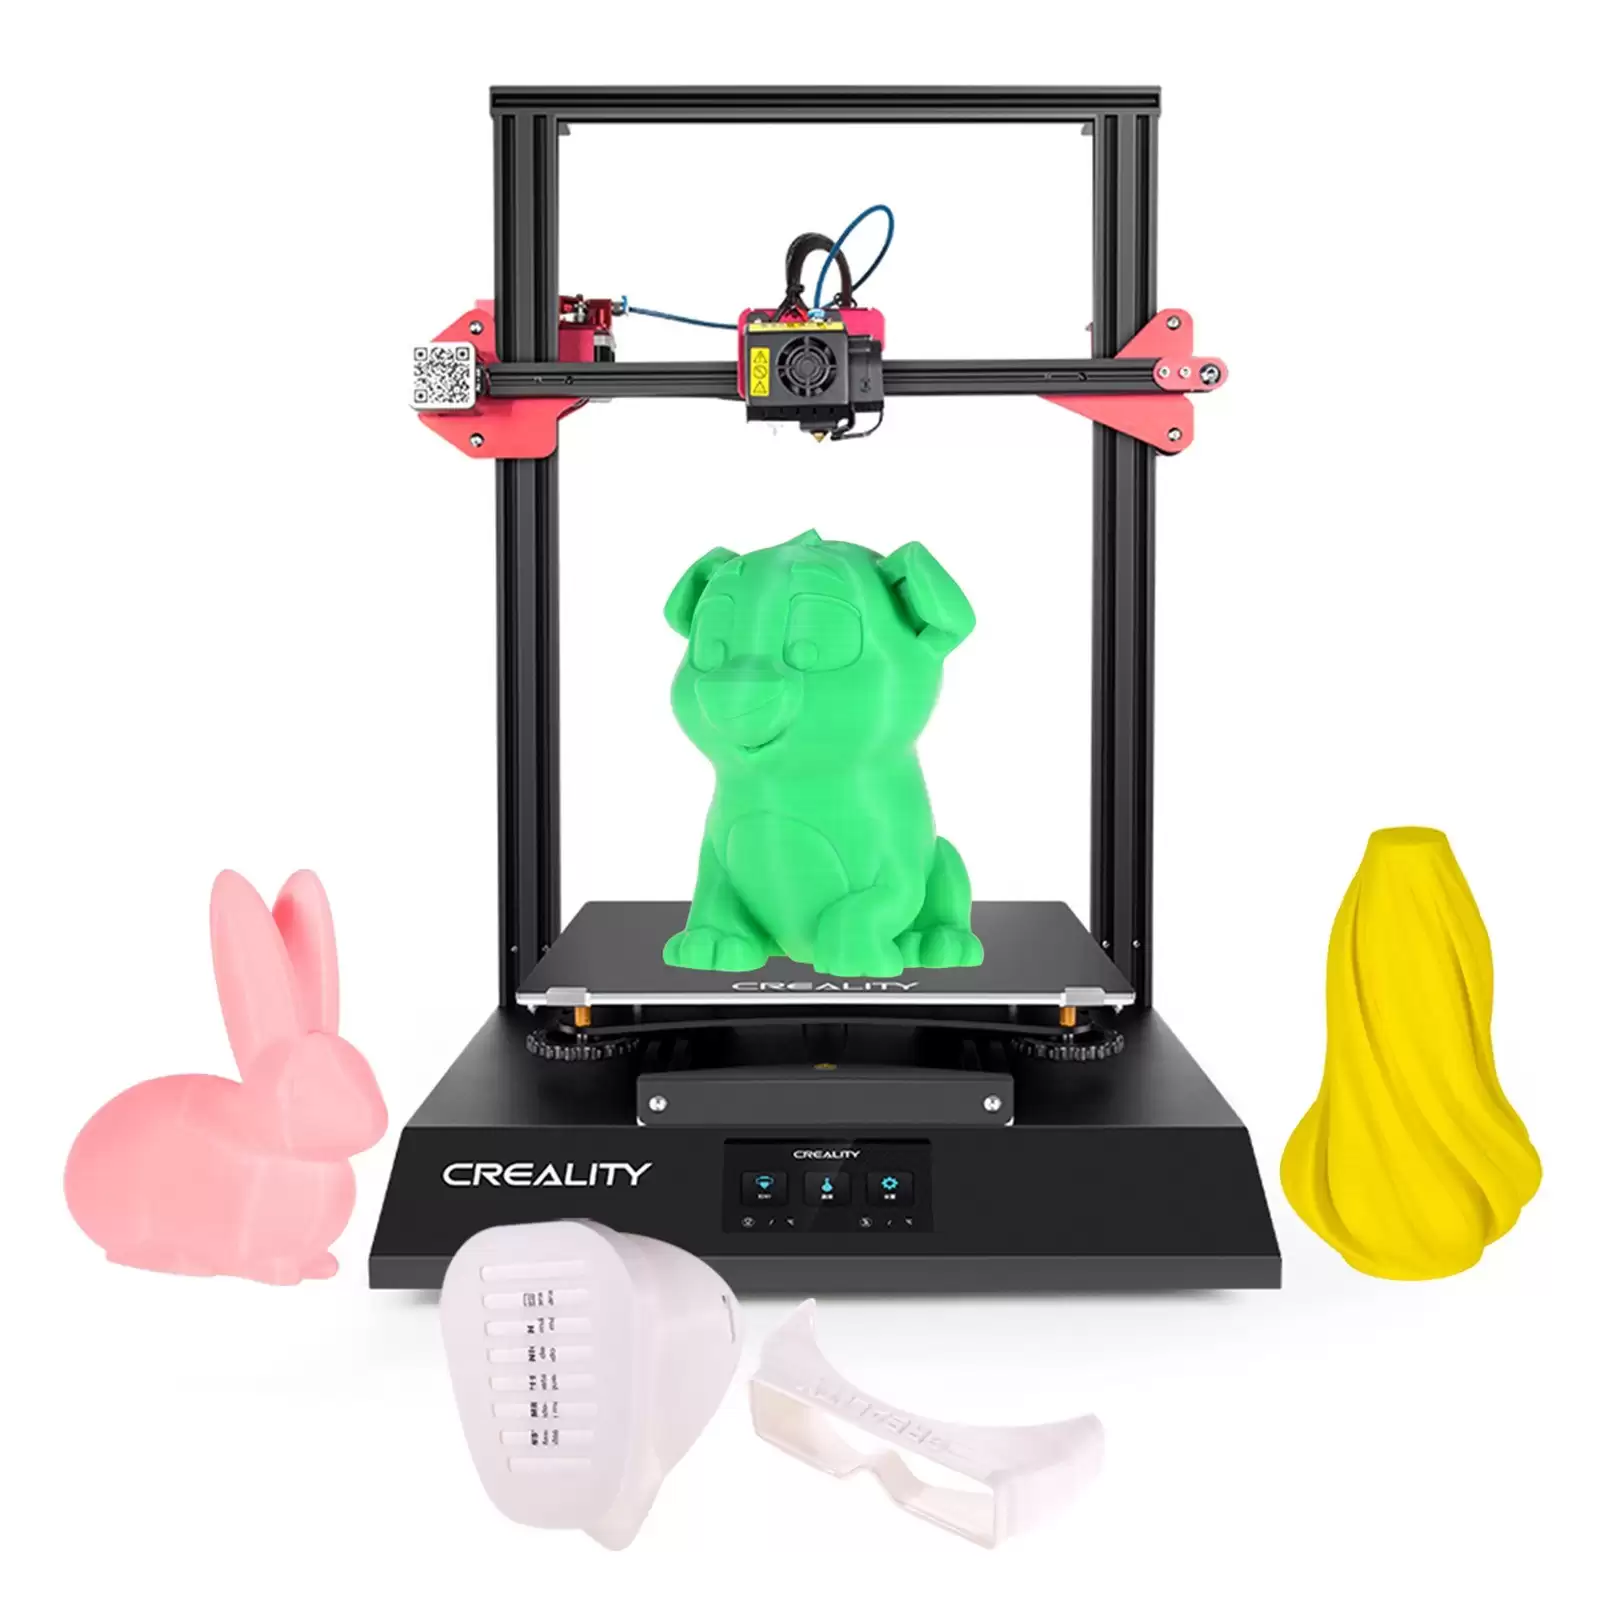 Order In Just $542.99 Get 68% Off On Creality Cr-10s Pro V2 3d Printer Eu Warehouse With This Discount Coupon At Tomtop